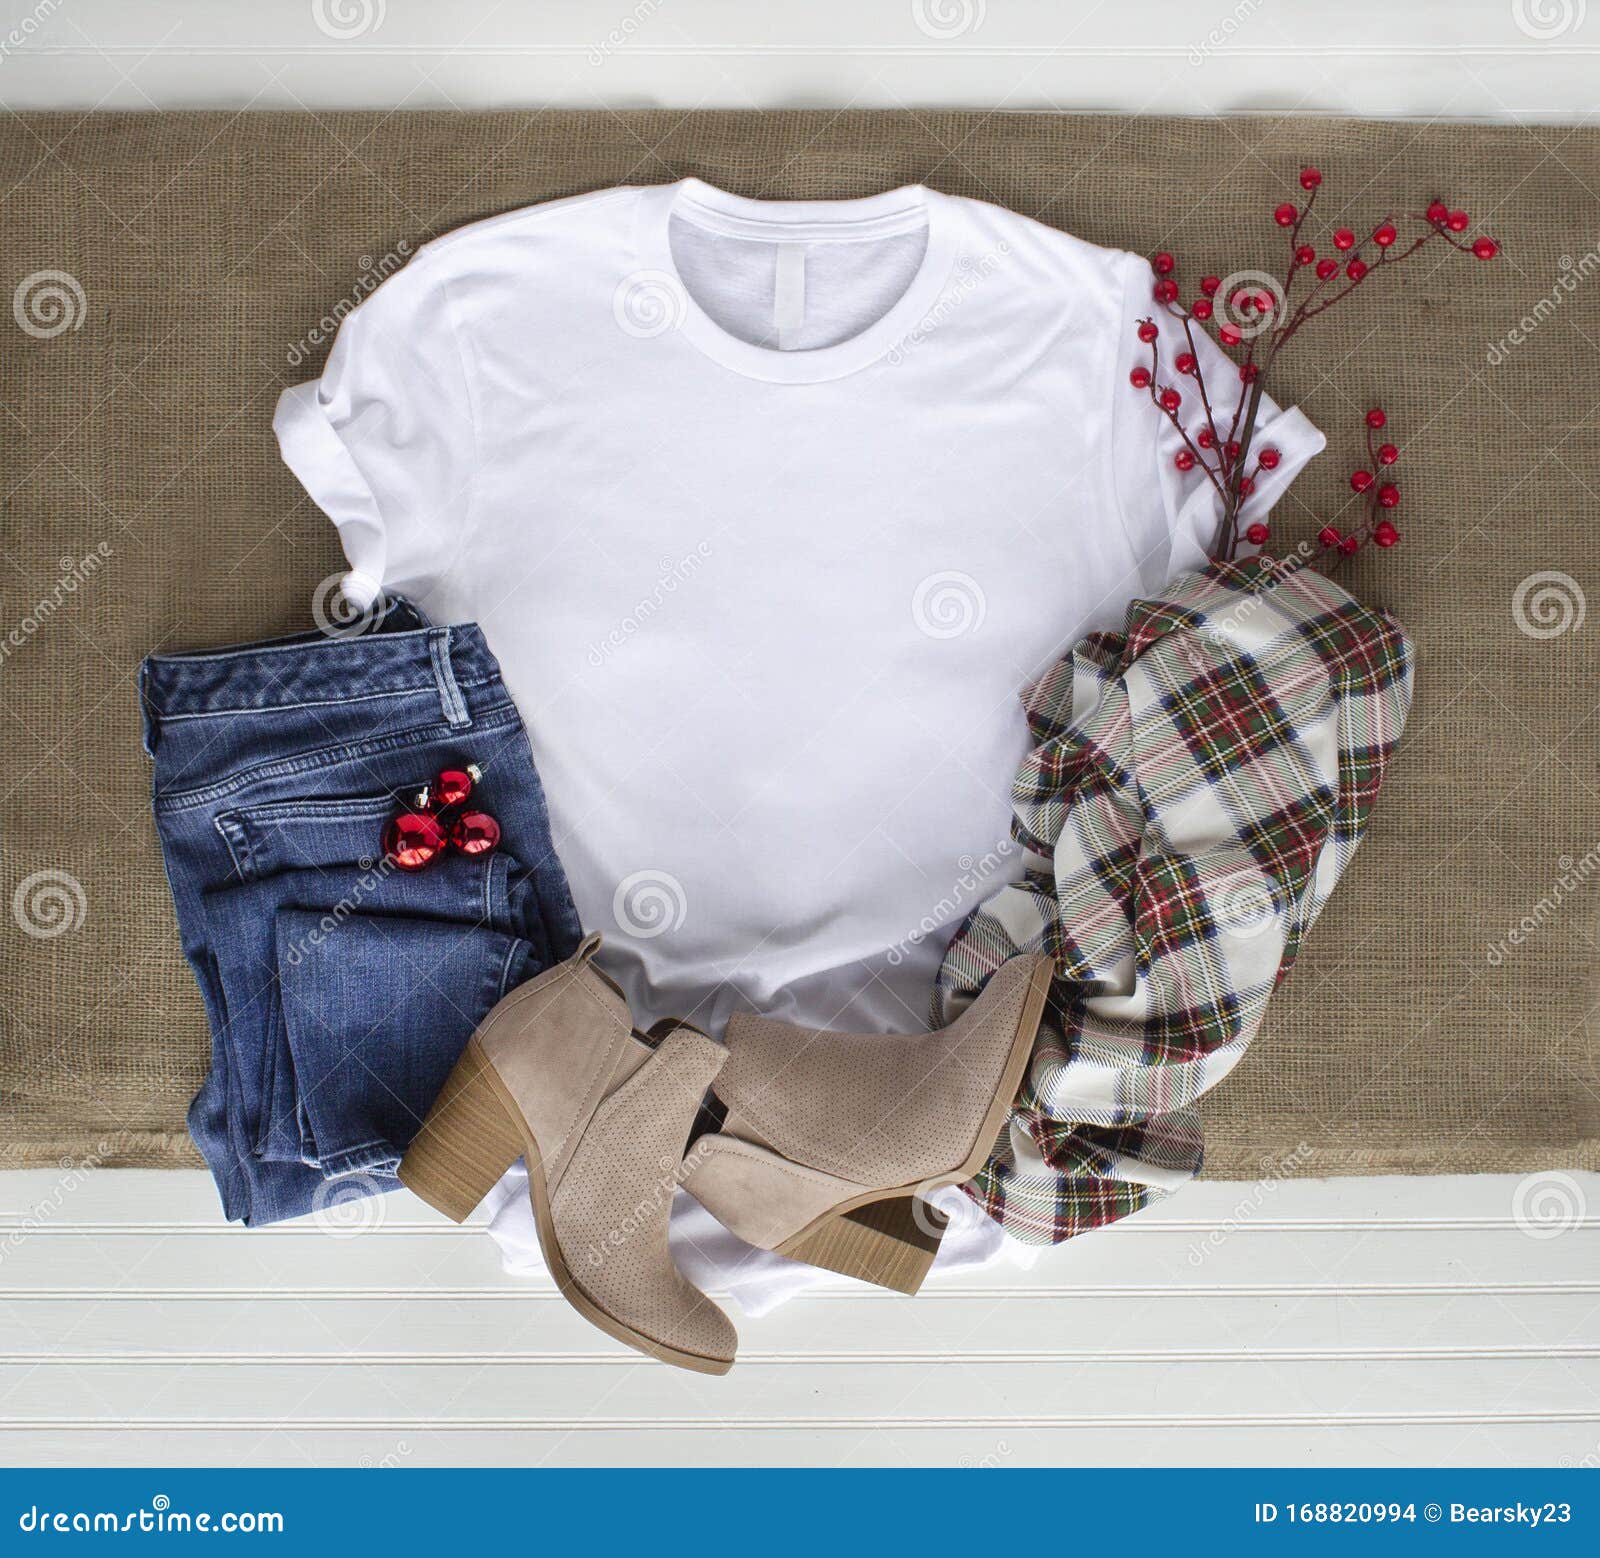 Download White Tshirt Mockup - Shirt Boots Plaid Scarf And Jeans ...